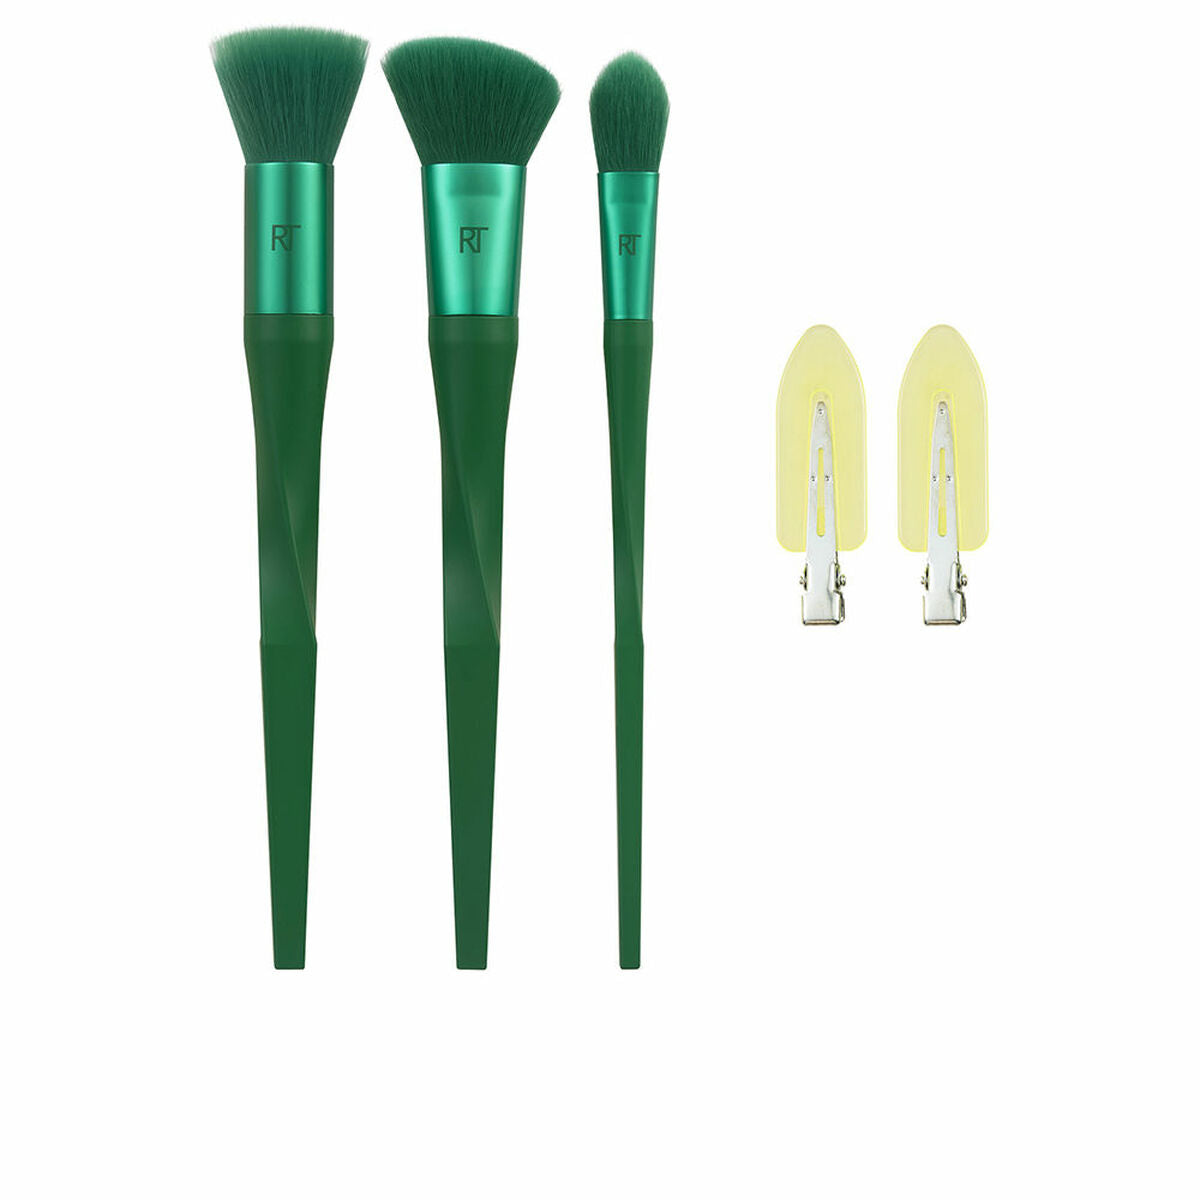 Set of Make-up Brushes Real Techniques Nectar Pop Glazed Daze Green 5 Pieces-0